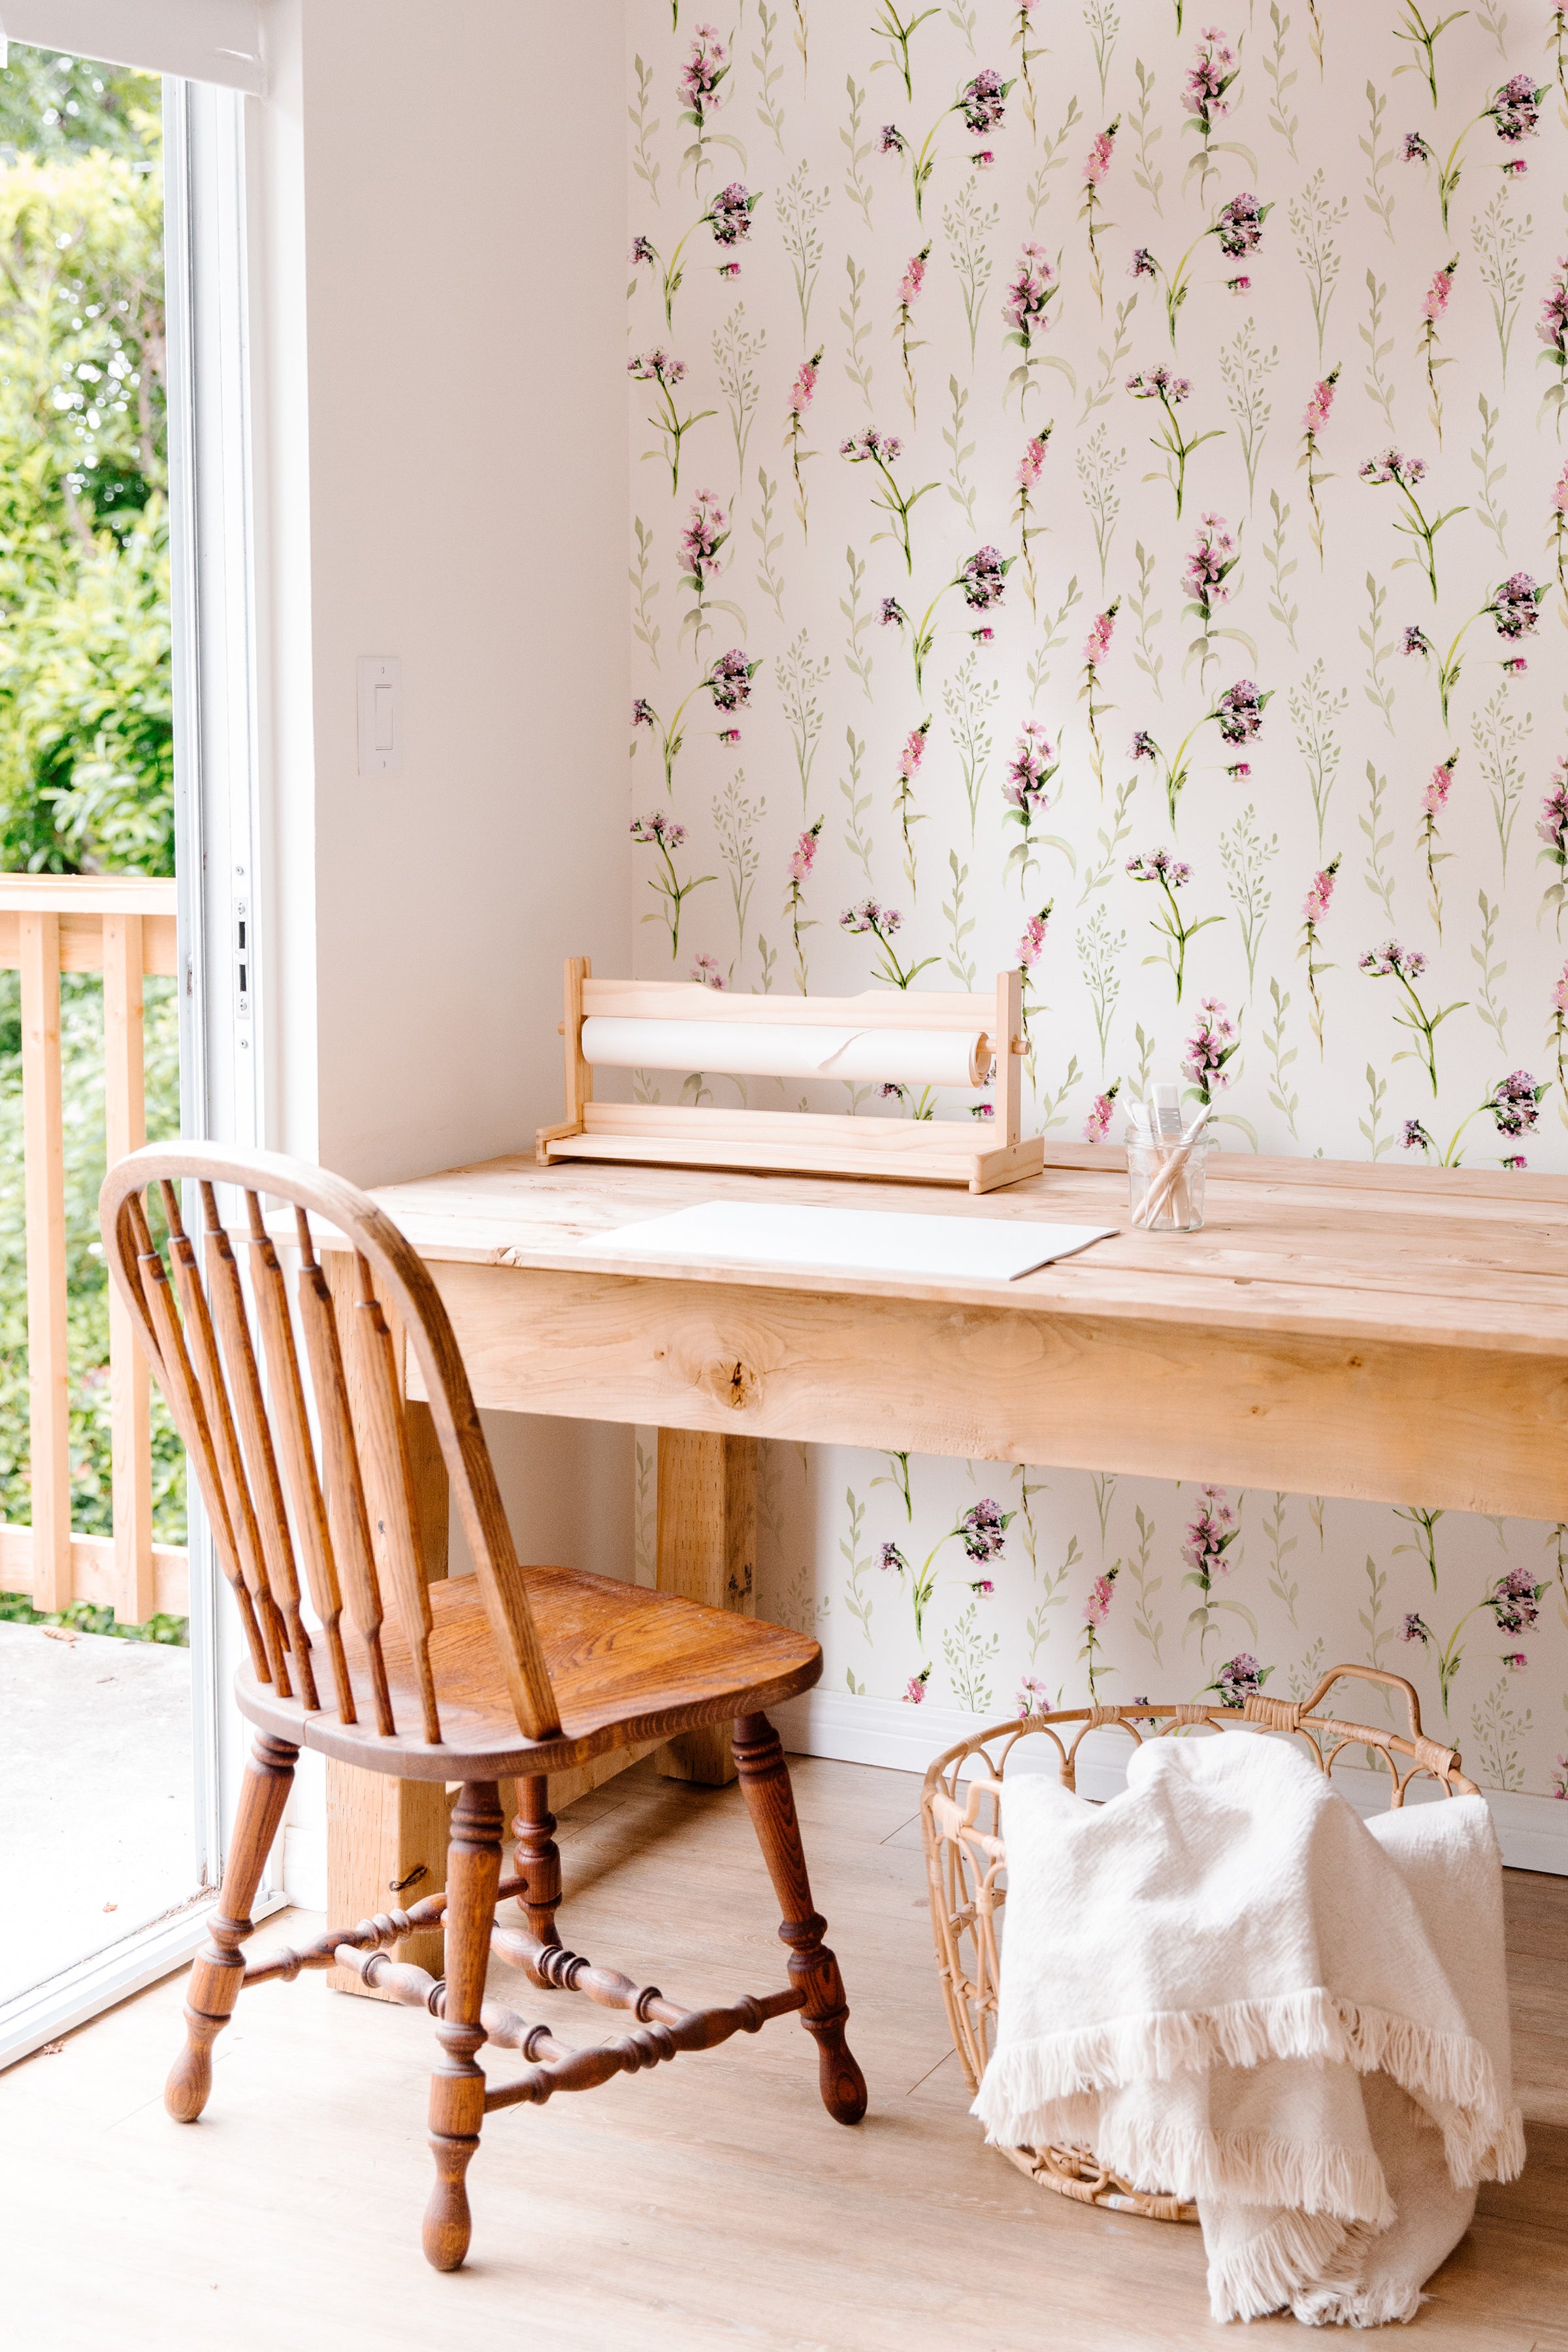 Interior view of a cozy workspace with a wooden desk and chair set against a wall covered in 'Blooming Spring Wallpaper.' The wallpaper features an elegant pattern of pink flowers and green leaves. Natural light streams in from a window to the left, overlooking a green outdoor area.